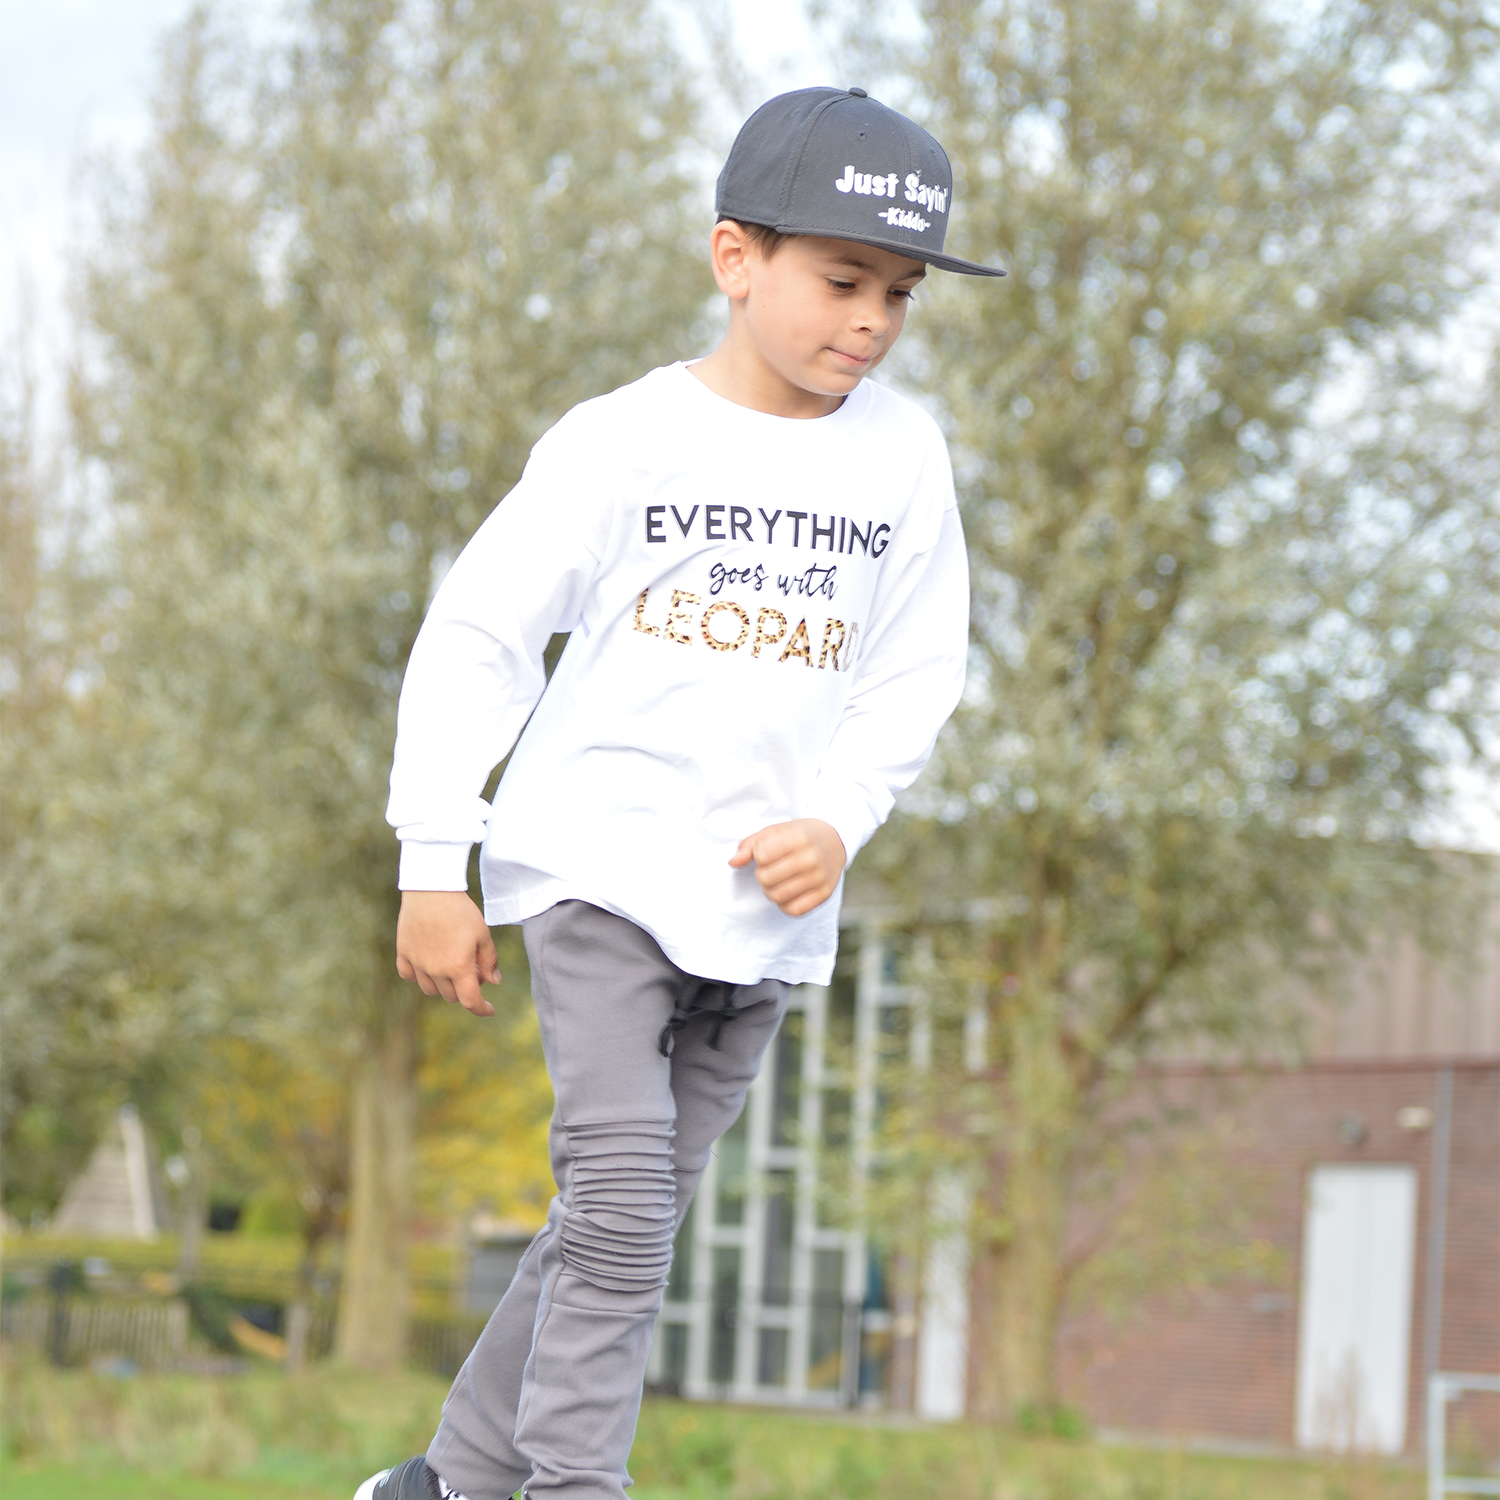 'Everything goes with leopard' kids longsleeve shirt